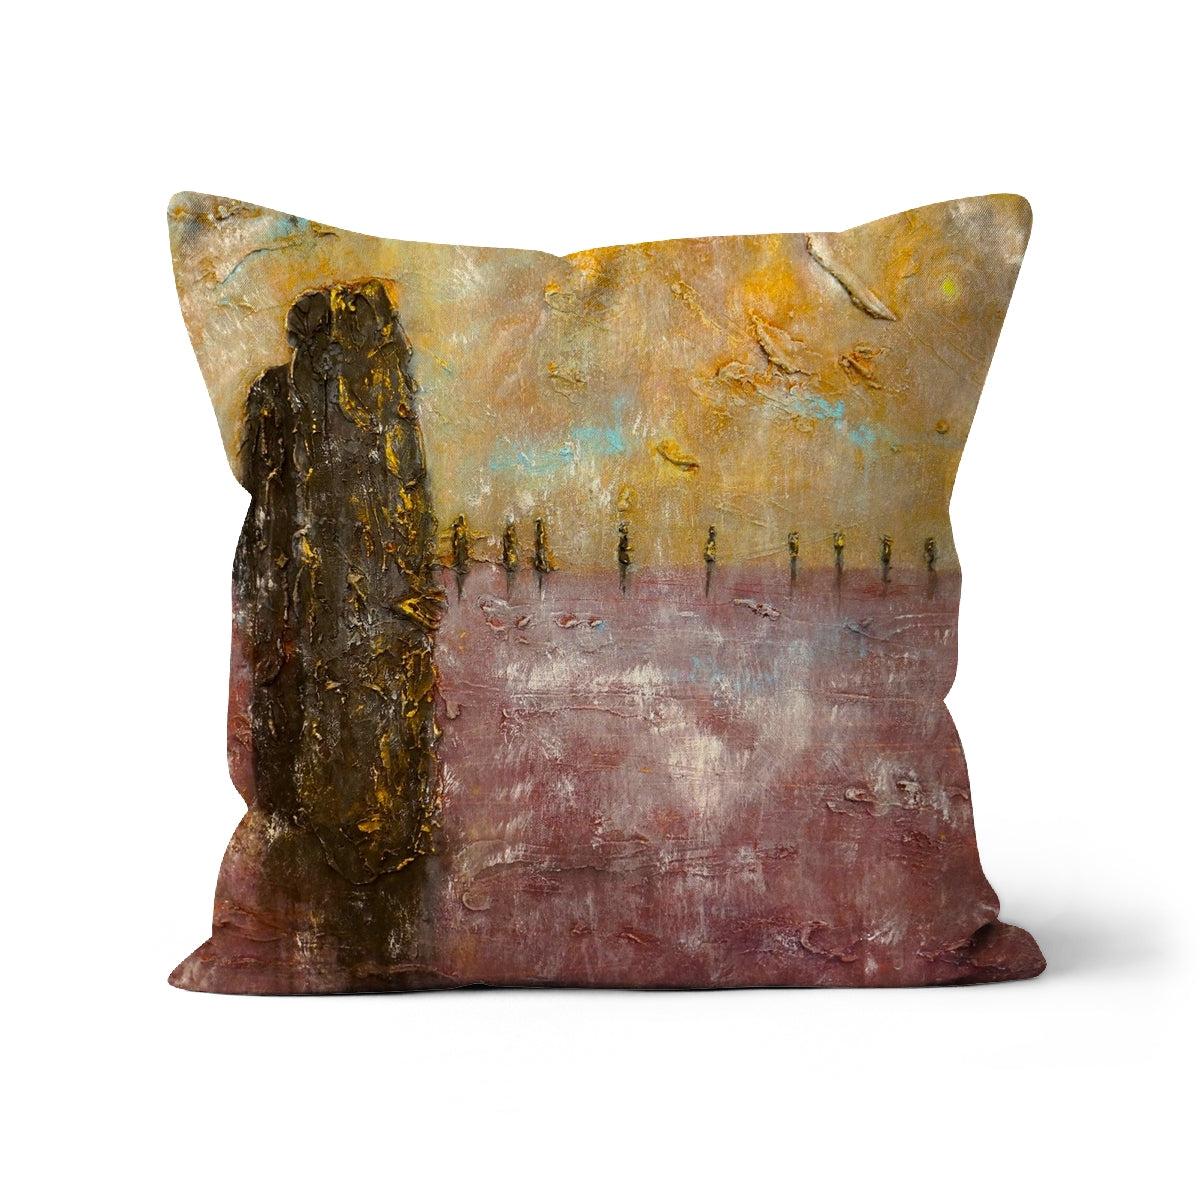 Bordgar Mist Orkney Art Gifts Cushion-Cushions-Orkney Art Gallery-Canvas-16"x16"-Paintings, Prints, Homeware, Art Gifts From Scotland By Scottish Artist Kevin Hunter